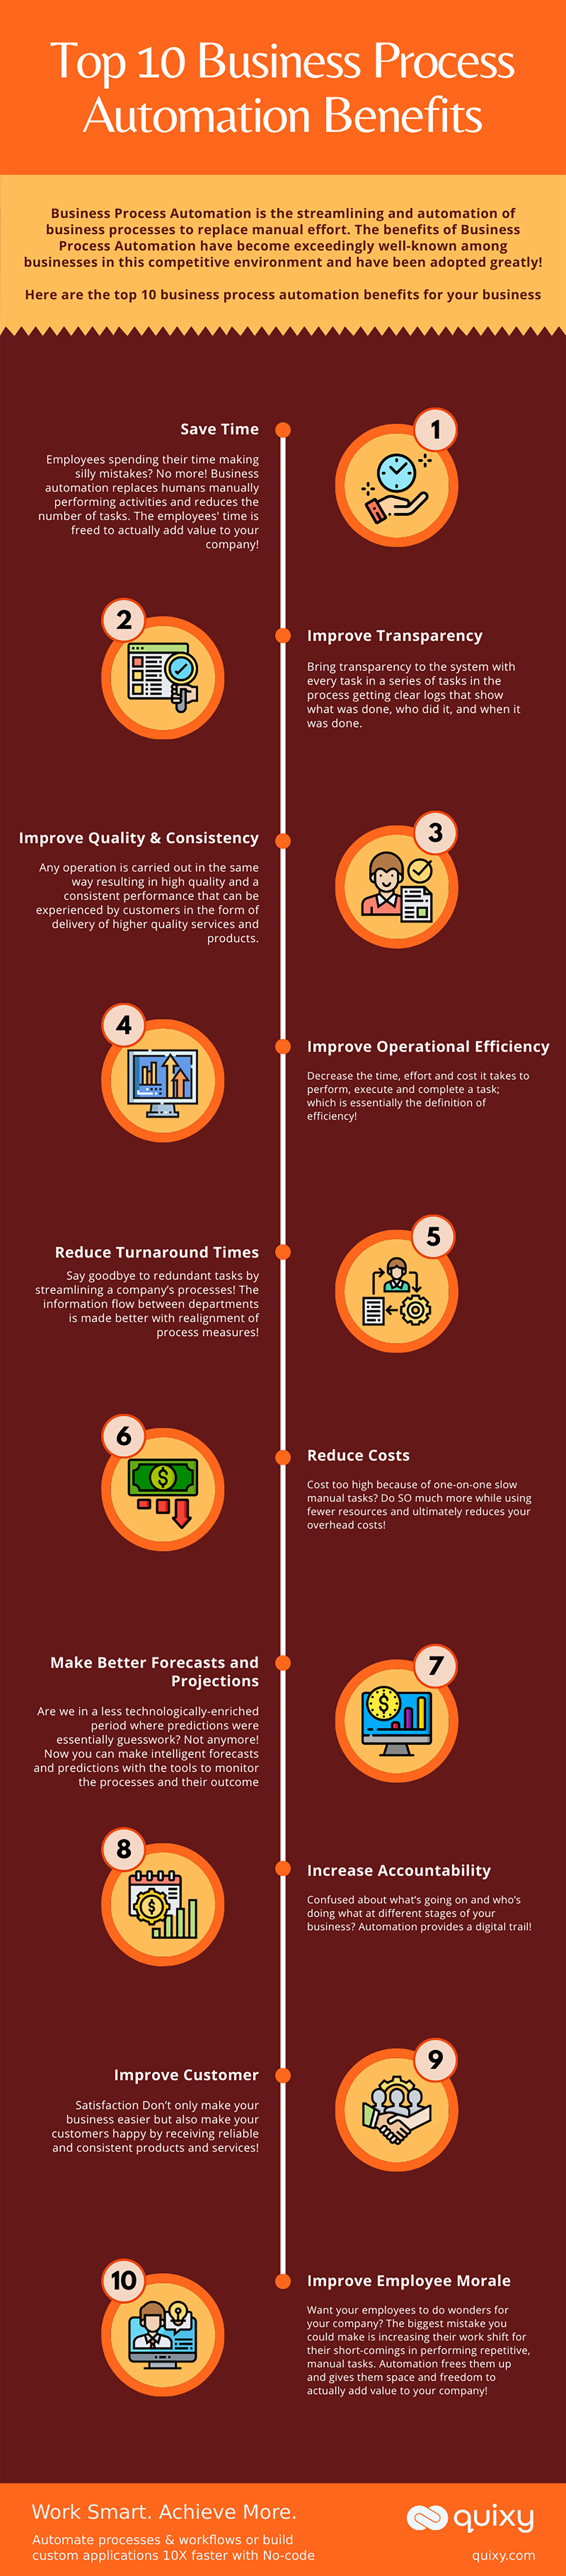 Top 10 Business Process Automation Benefits Infographic